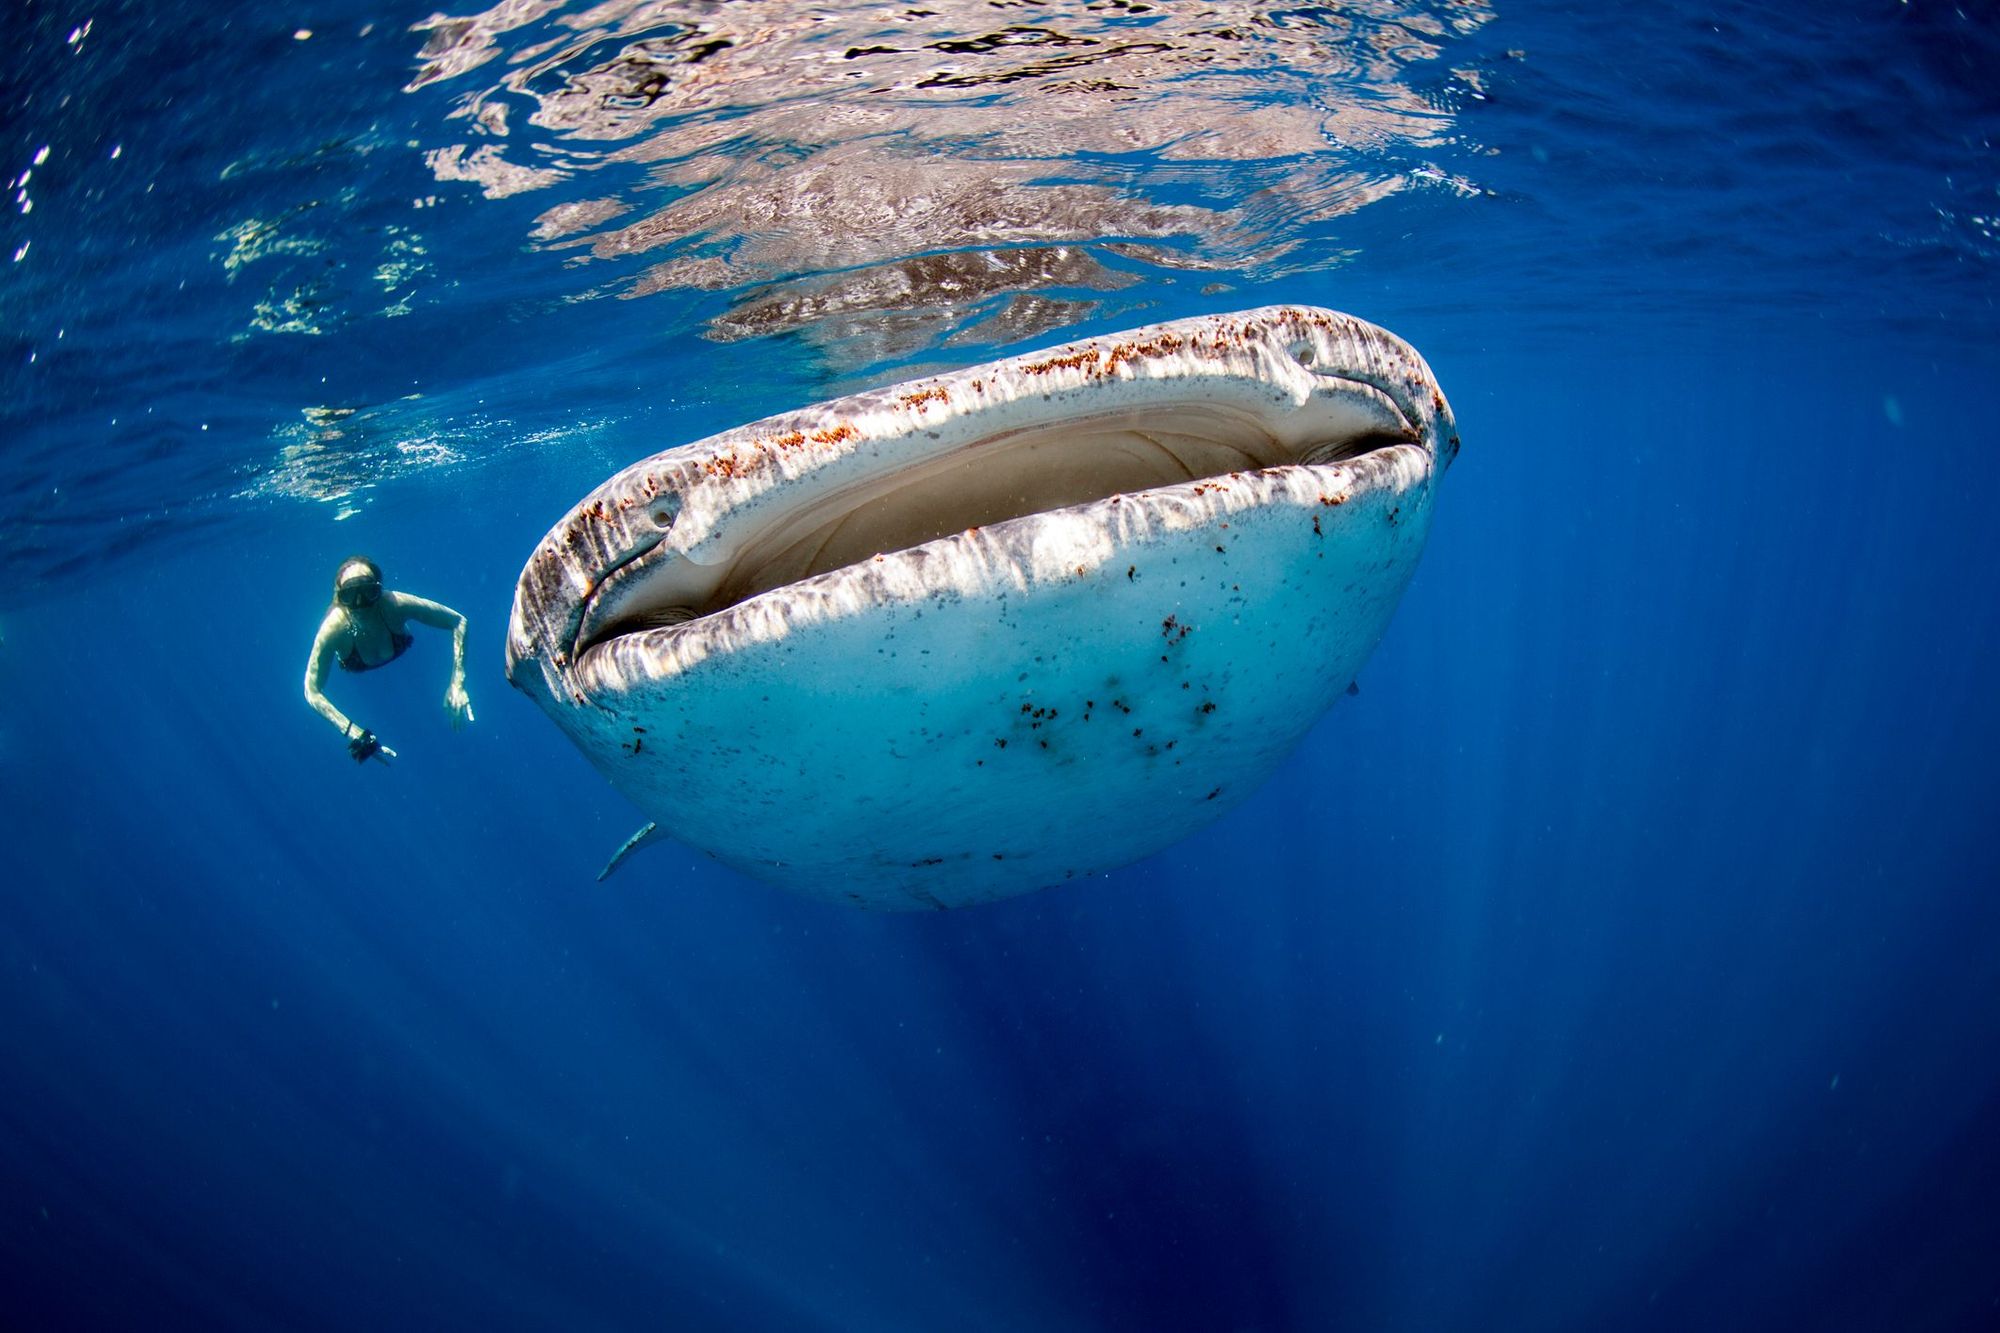 A mighty whale shark in the oceans of the Maldives, also known as the friendly giant of the water. Photo: Getty